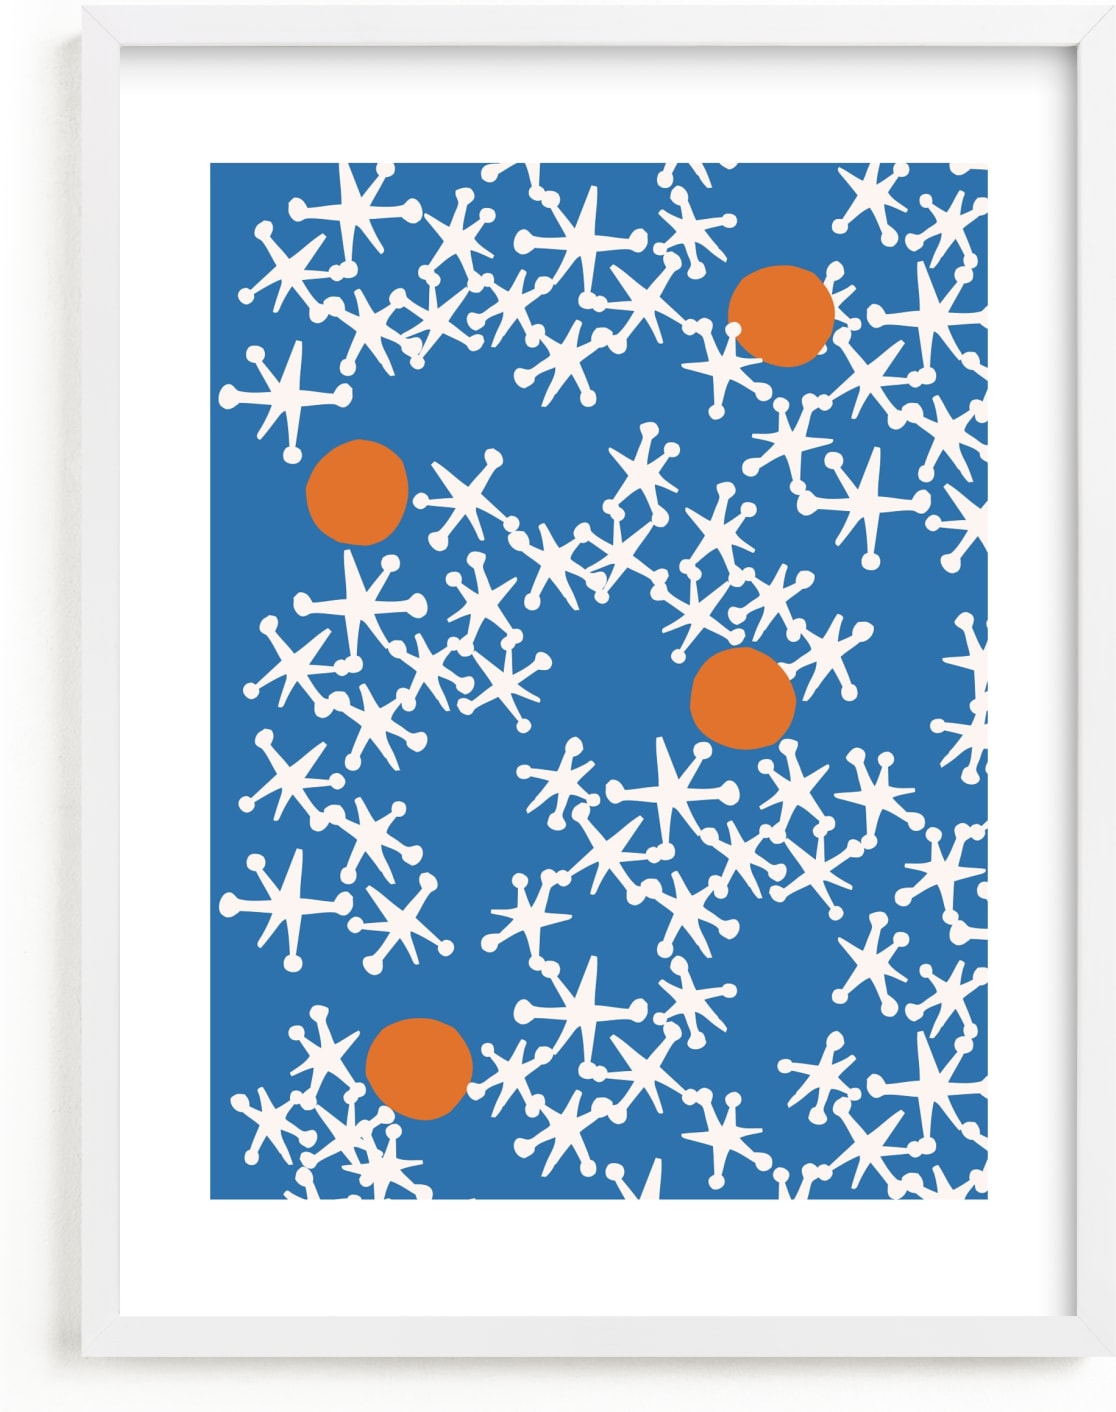 This is a blue kids wall art by Ampersand Design Studio called Fun & Games III.